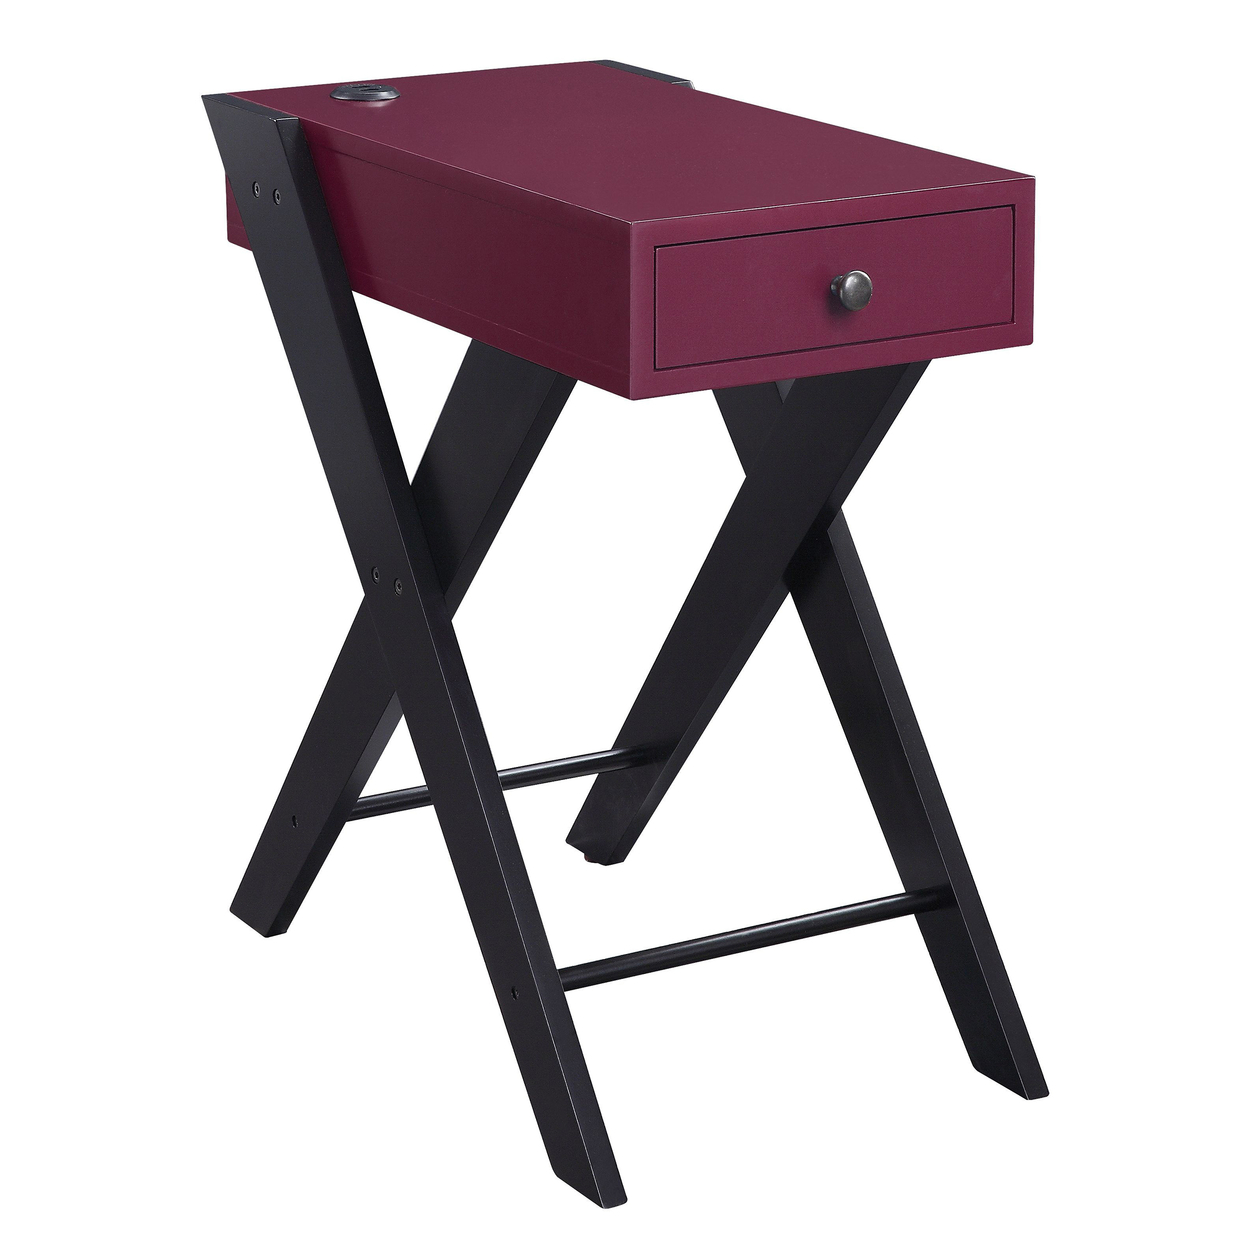 Wooden Frame Side Table With X Shaped Legs And 1 Drawer, Purple And Black- Saltoro Sherpi